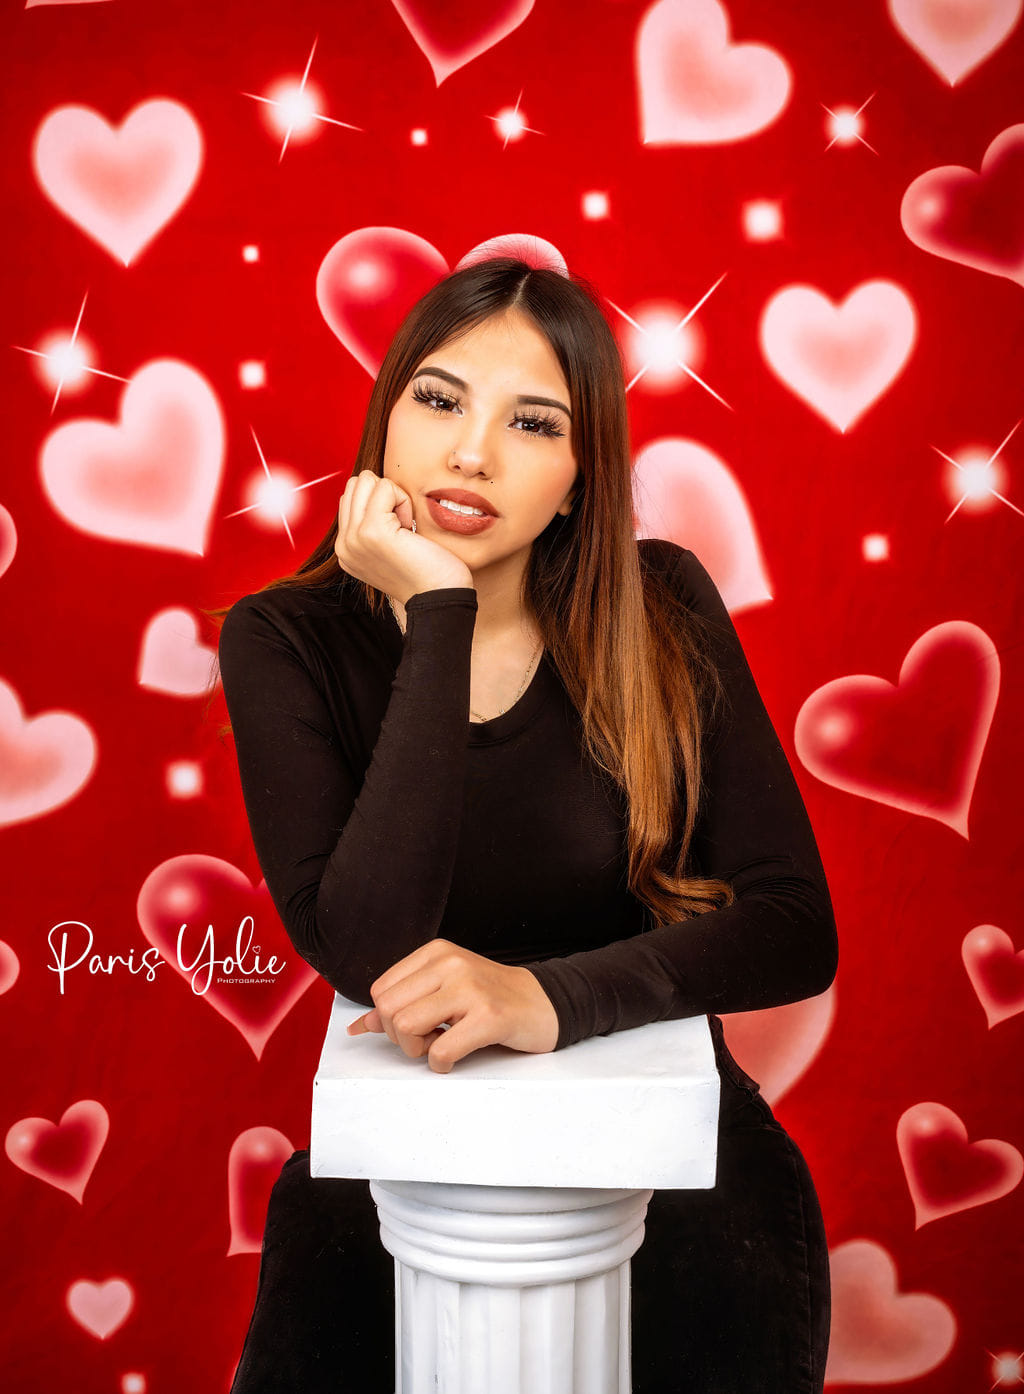 Kate 80 90's Valentine's Day Backdrop Red Sweet Heart Love for Photography